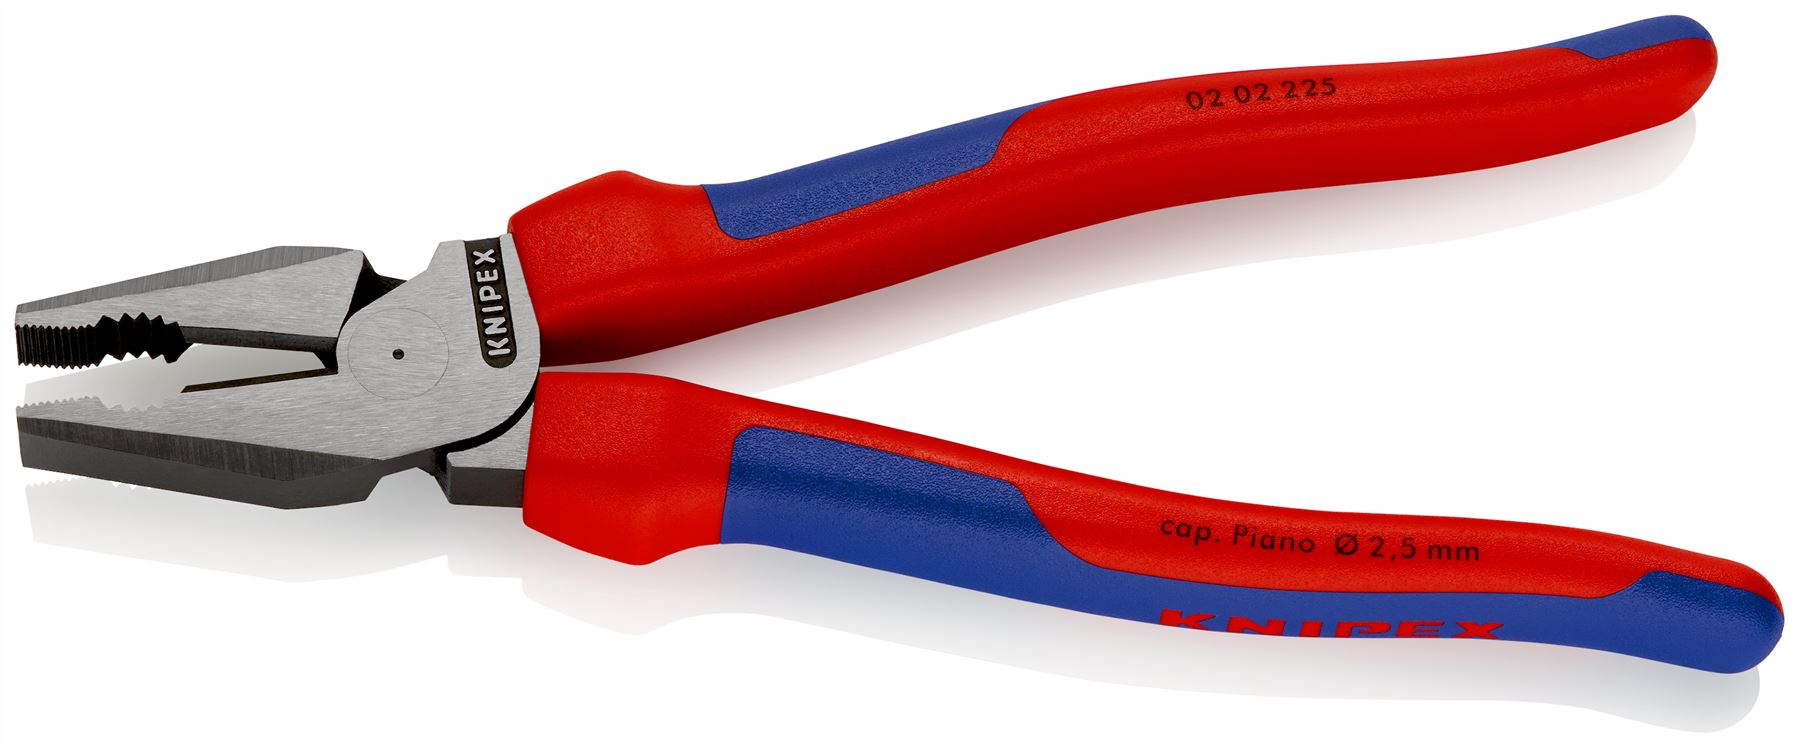 KNIPEX Revolving Punch Pliers 2-5mm Capacity 220mm for Fabrics Leather